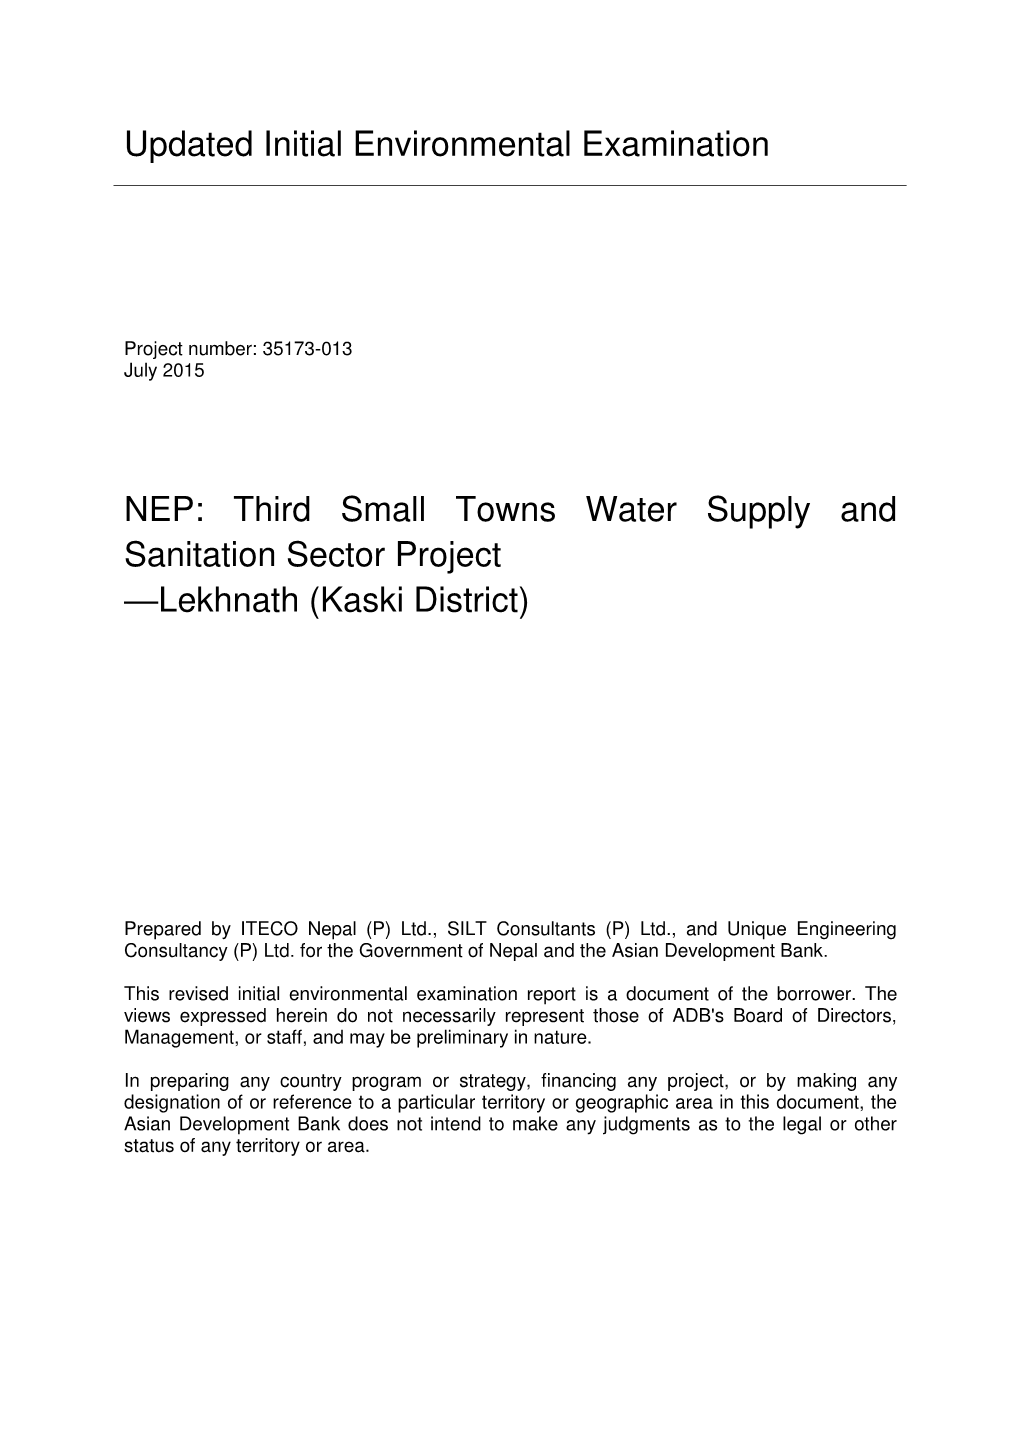 NEP: Third Small Towns Water Supply and Sanitation Sector Project —Lekhnath (Kaski District)